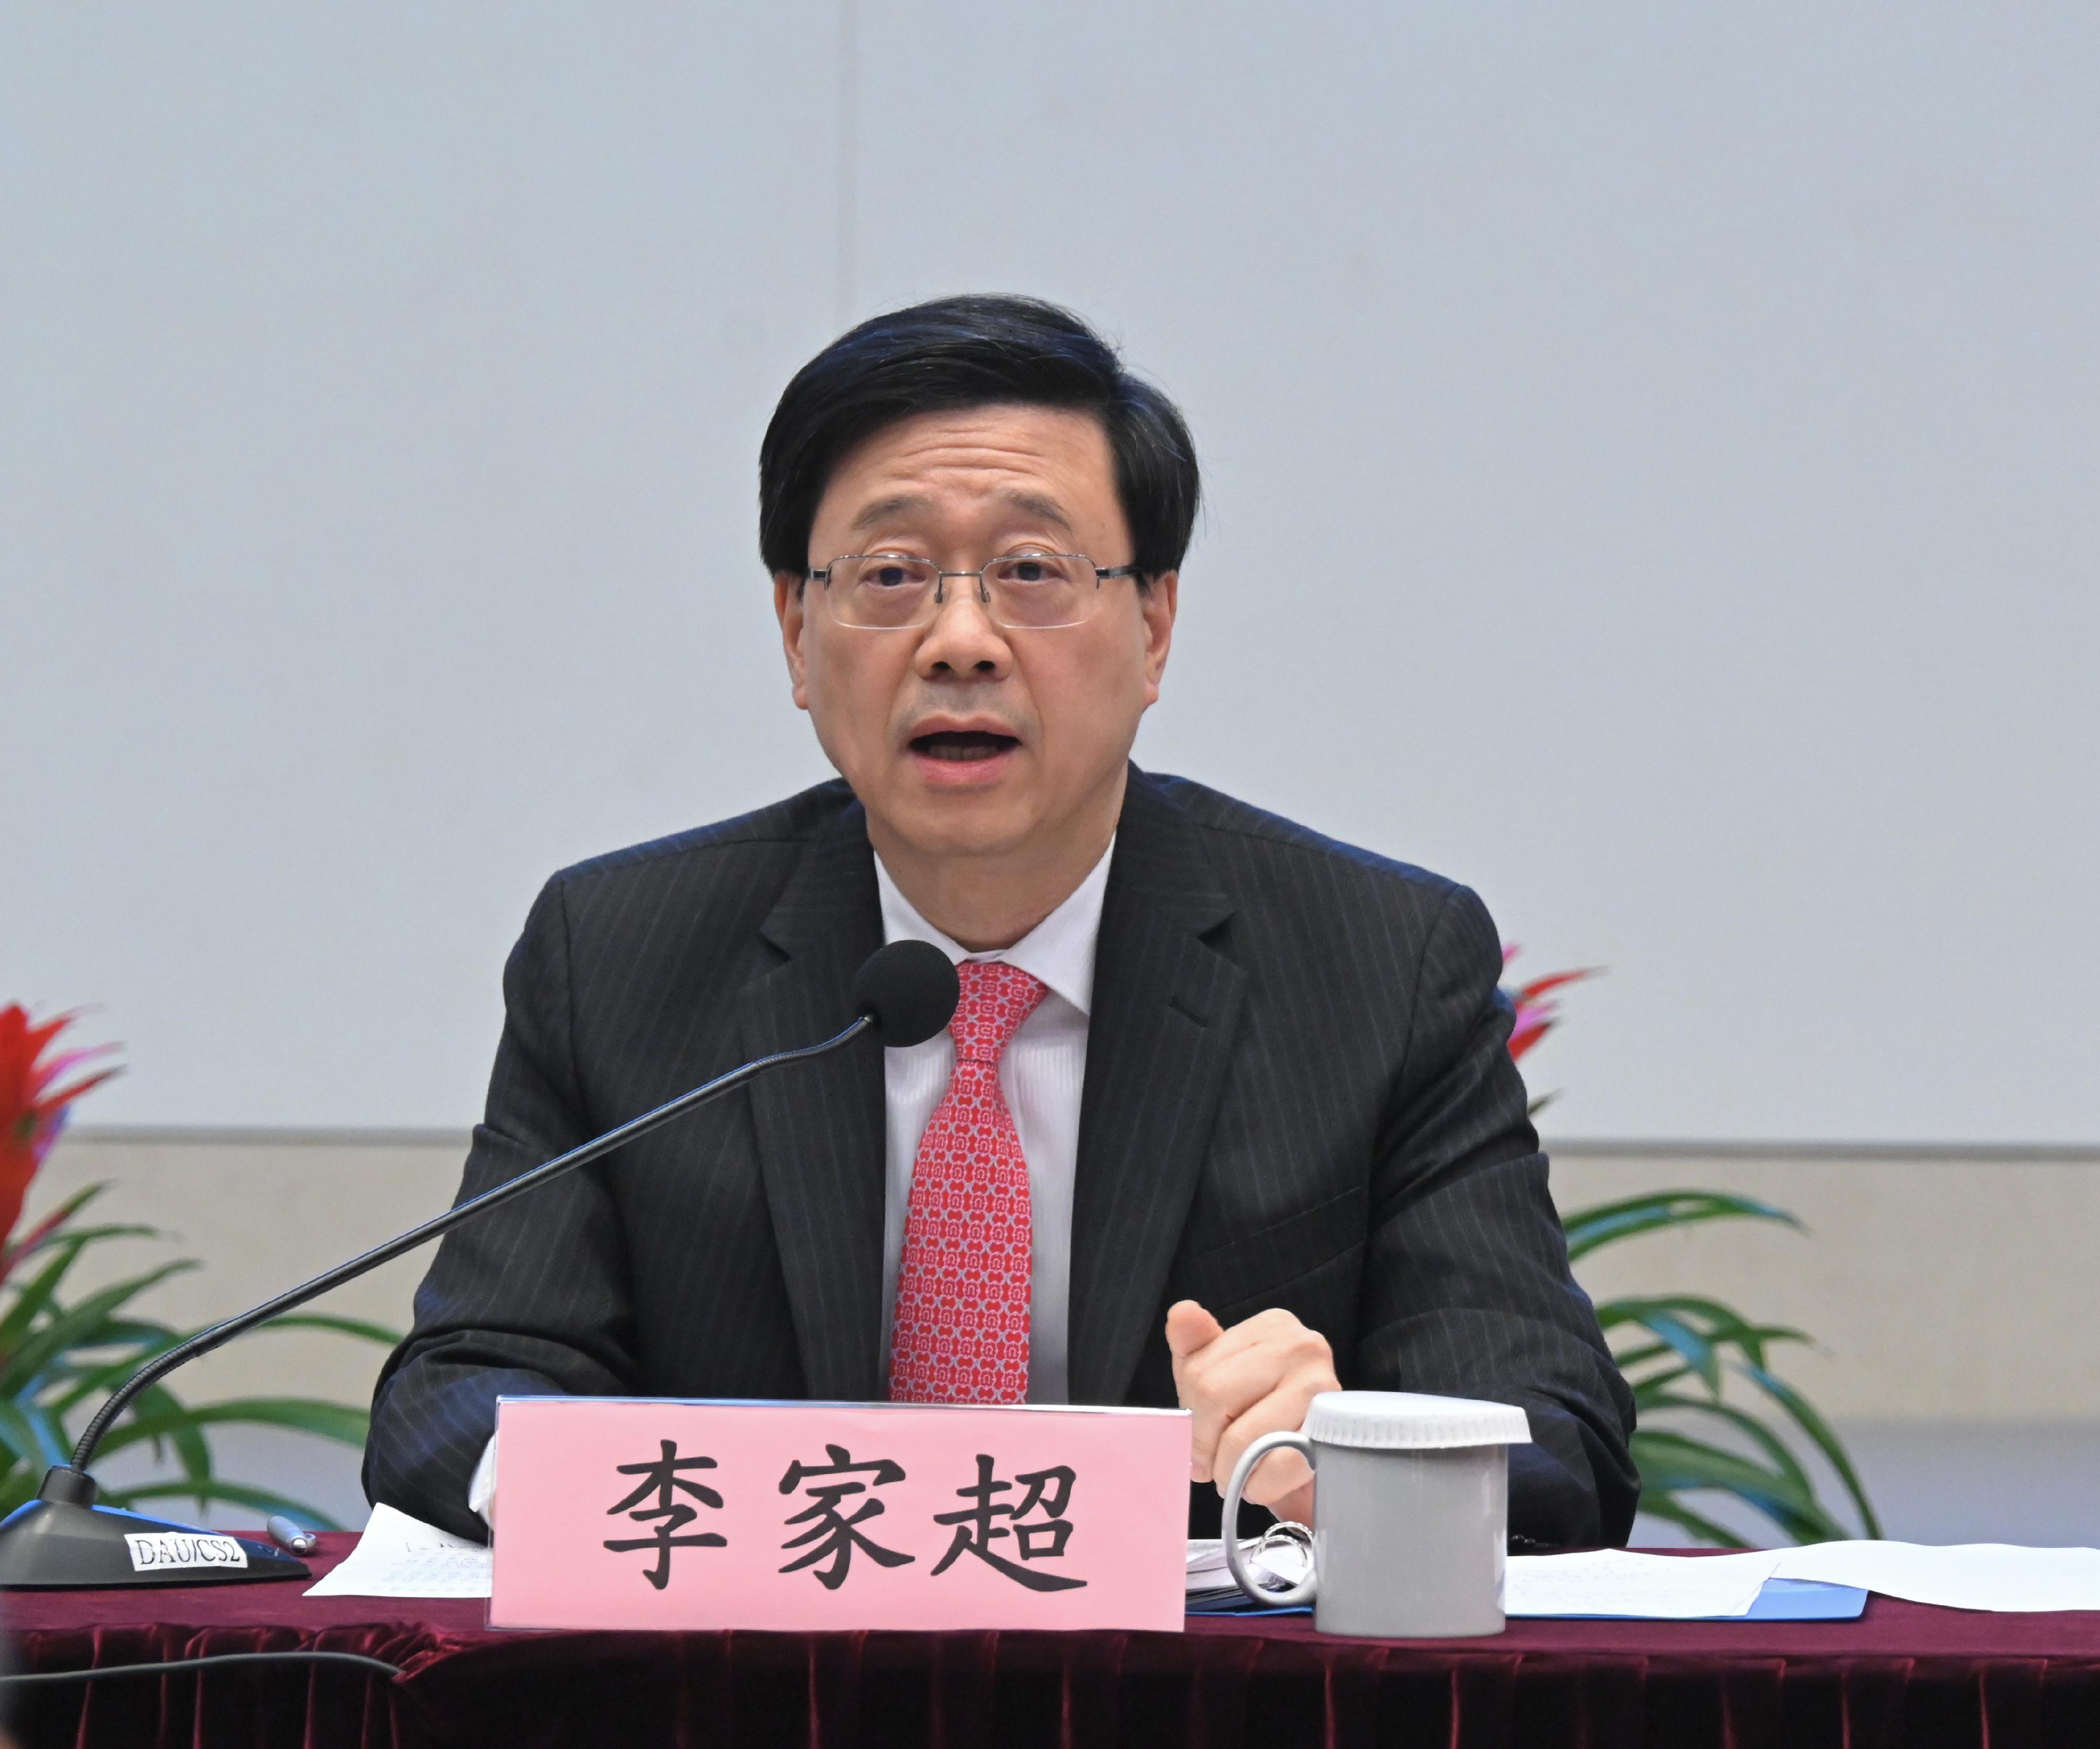 The Hong Kong Special Administrative Region Government today (March 28) held a seminar on learning and implementing the spirit of the "two sessions" at the Central Government Offices. Photo shows the Chief Executive, Mr John Lee, speaking at the seminar.